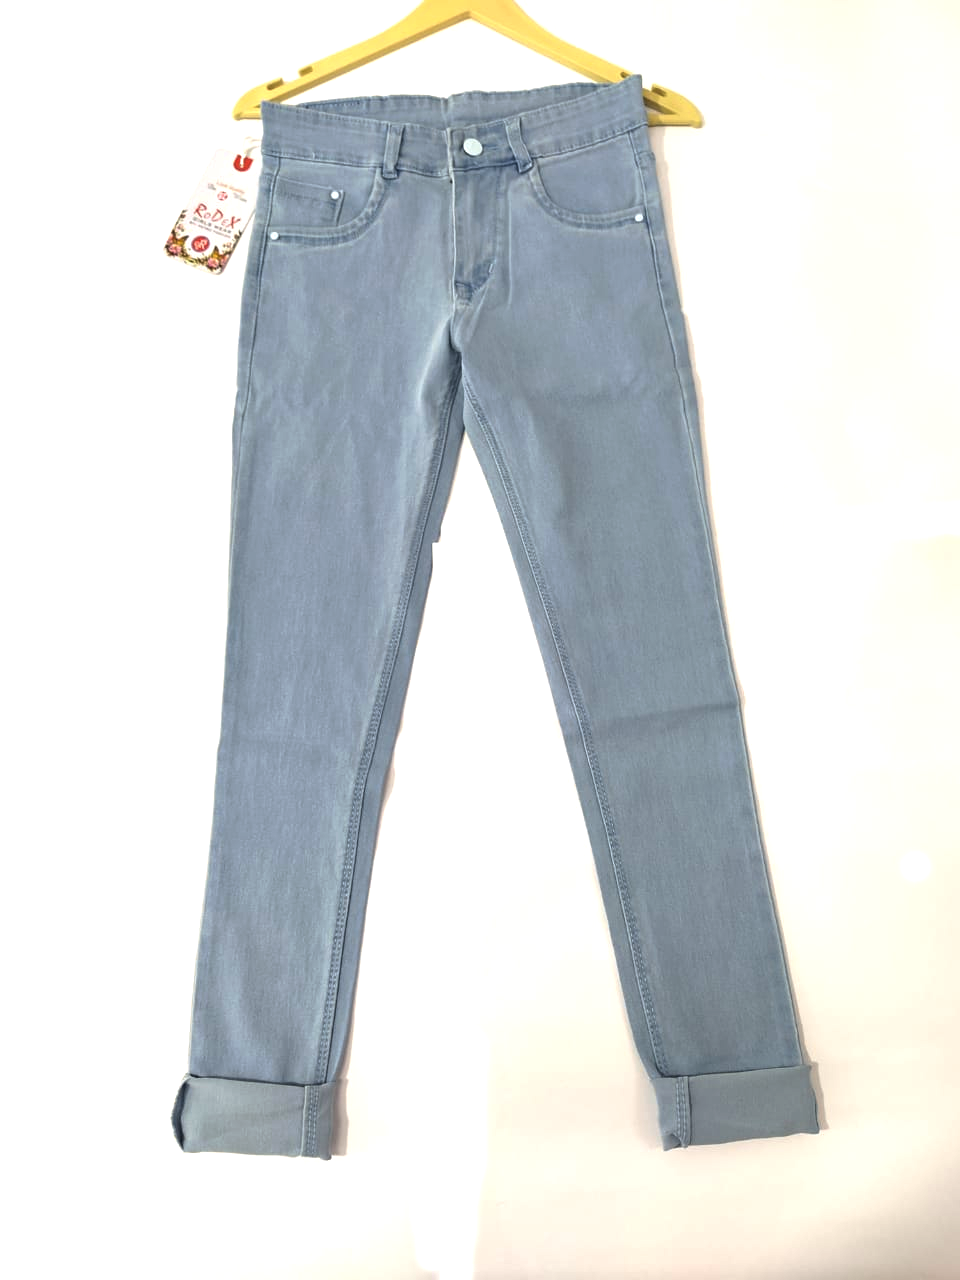 kmart mens jeans big and tall